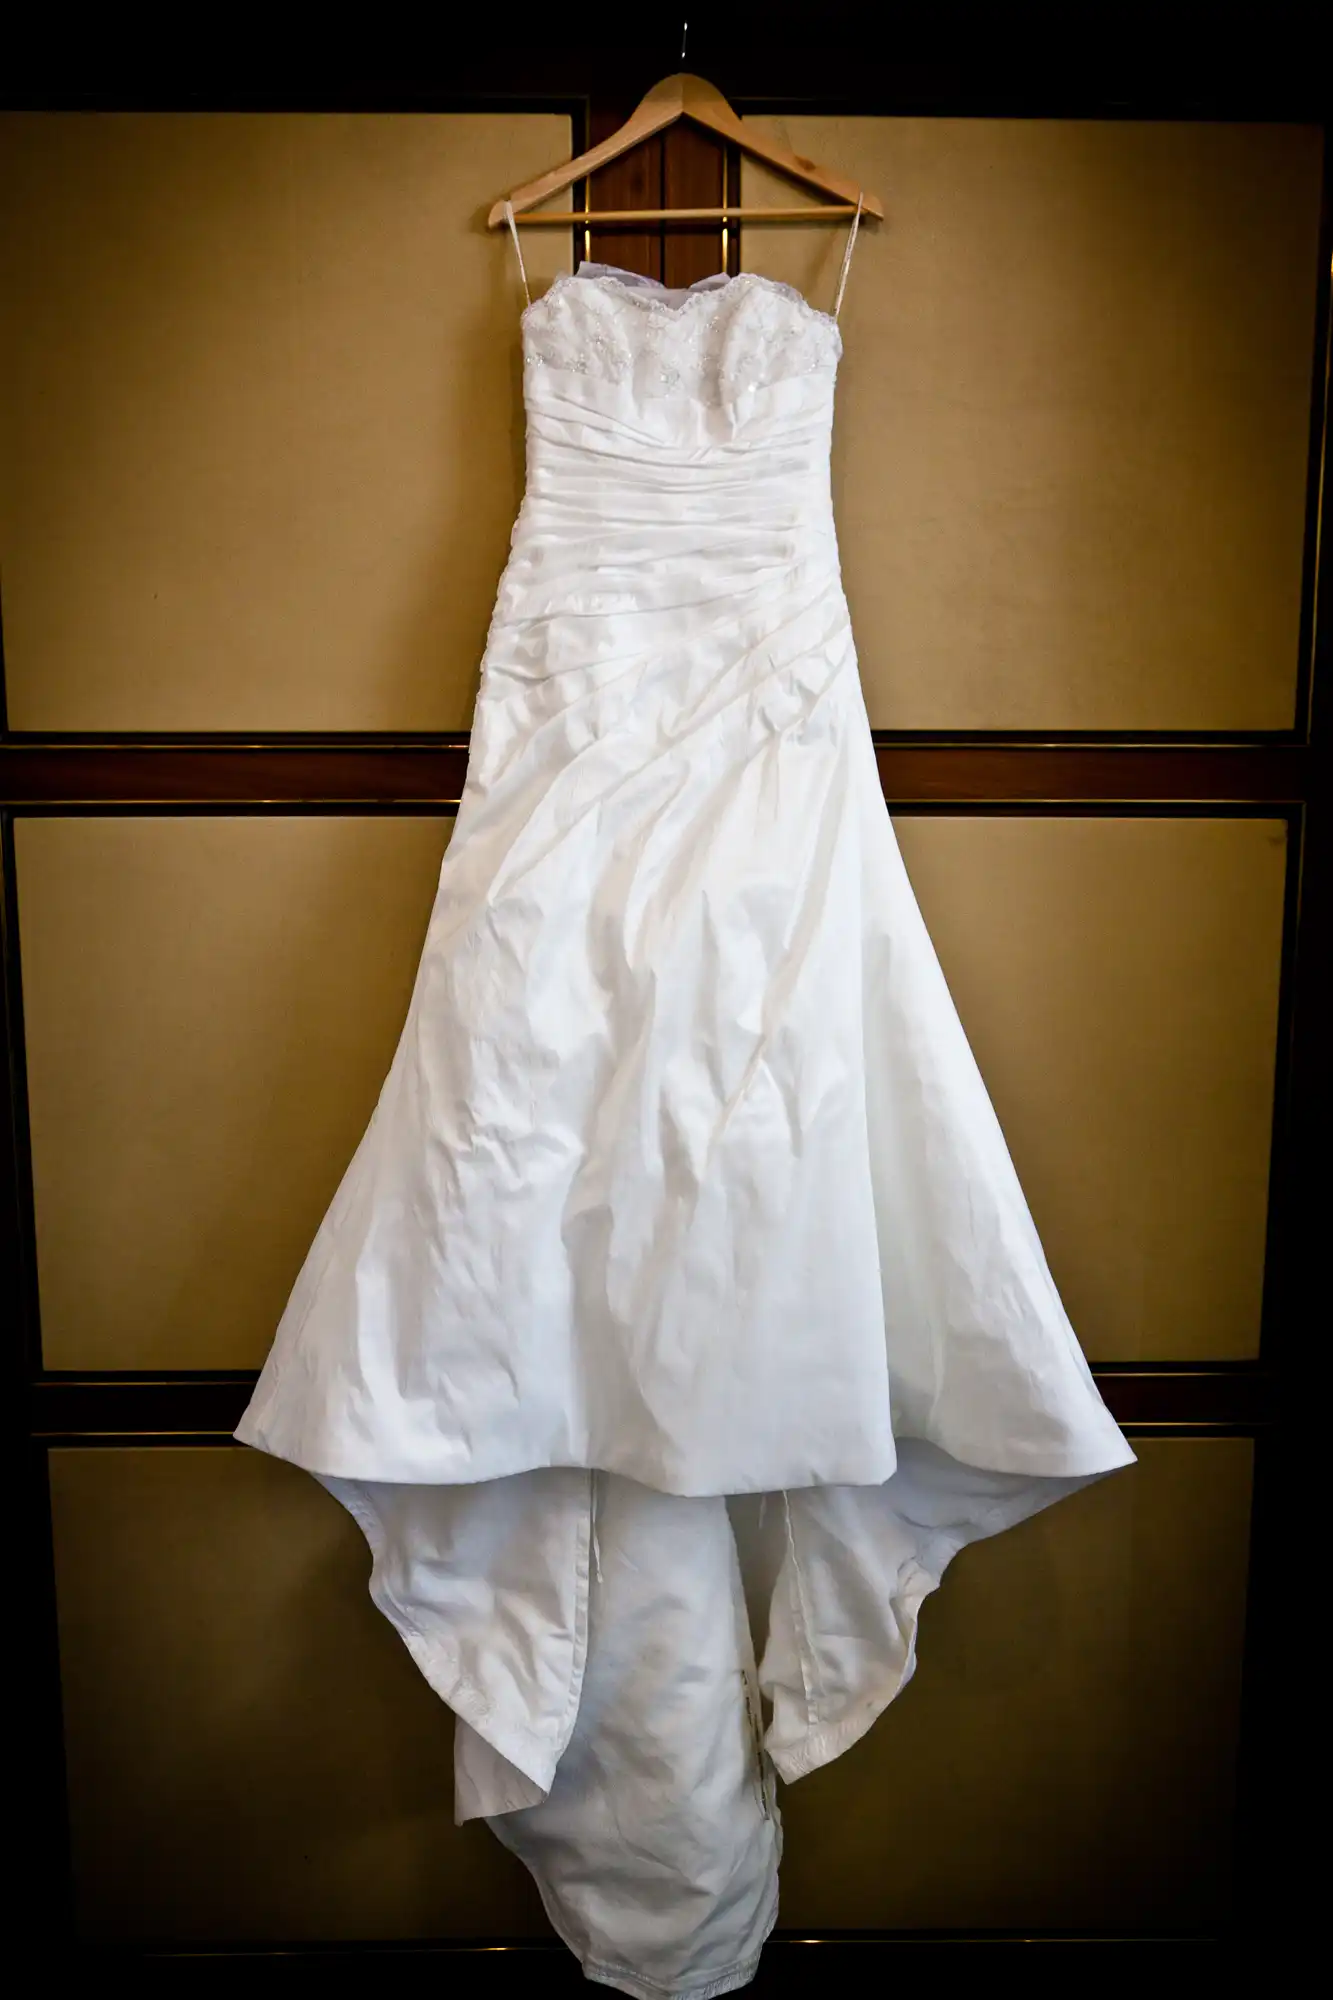 An elegant white wedding dress with a sweetheart neckline hangs on a wooden hanger against a patterned beige background.